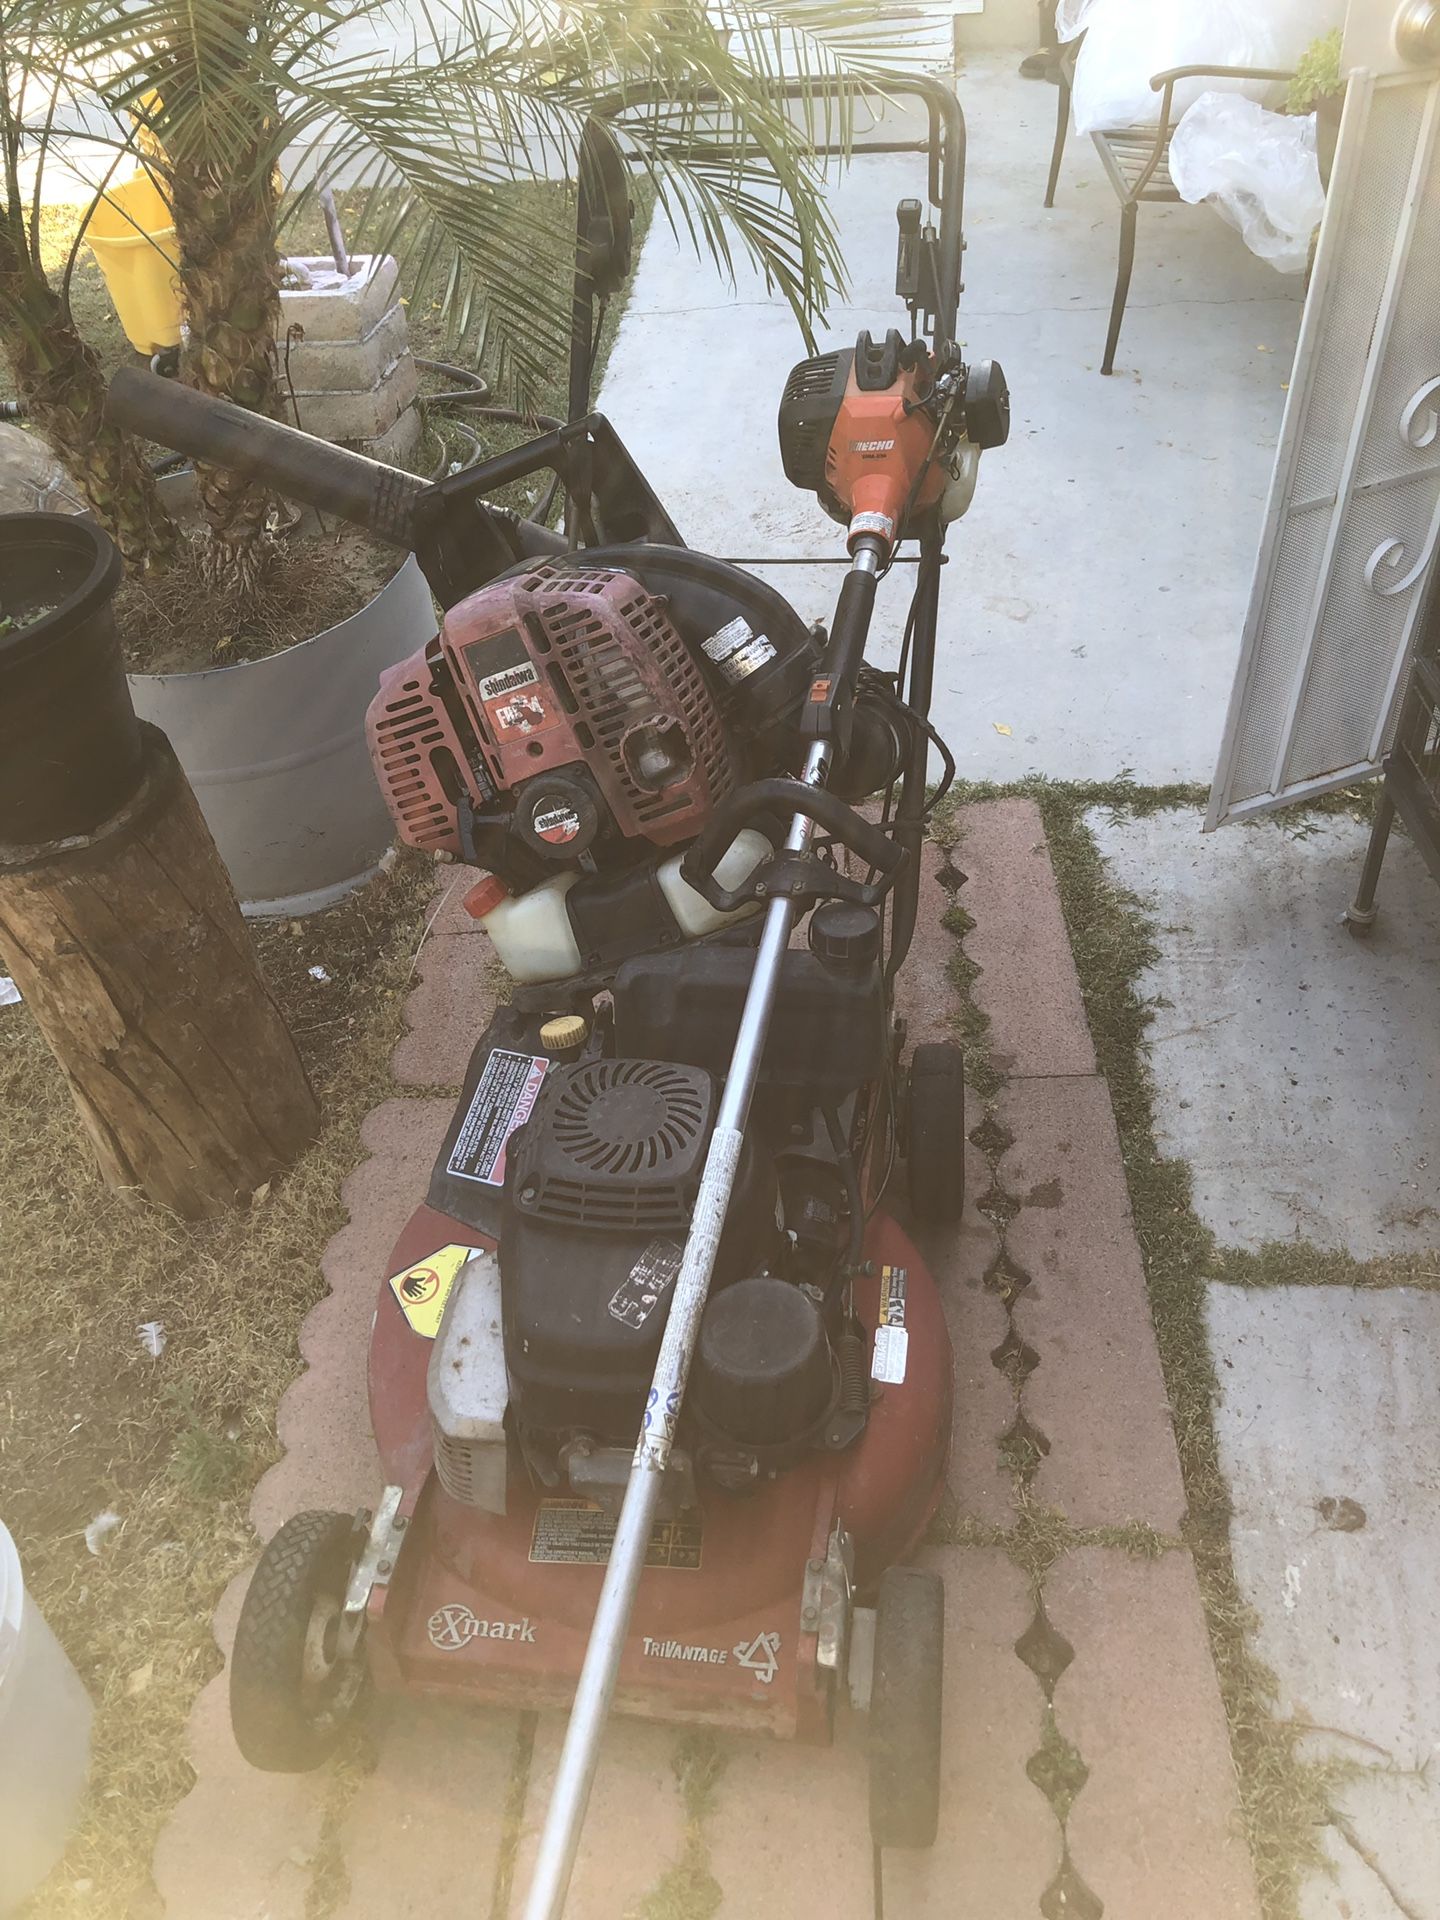 Lawnmower trimmer blower to start a small business it’s a toro with Kawasaki motor and trimmer is Echo and the blower is shindawa working good I don’